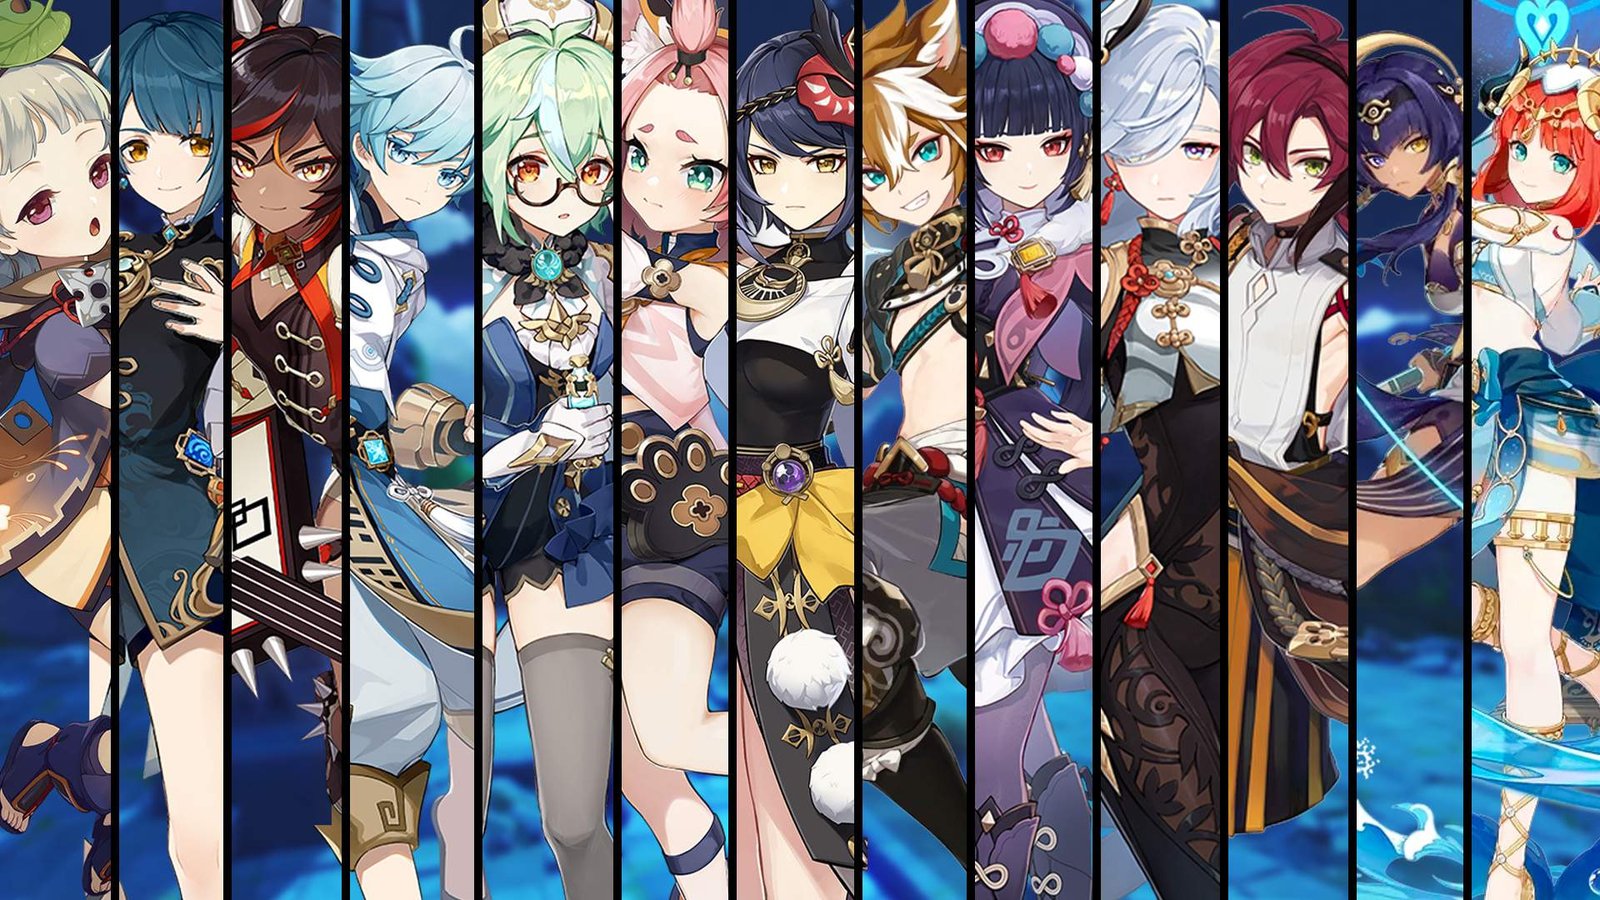 Epic Seven Tier List 2023, Best Characters in the Tier - News